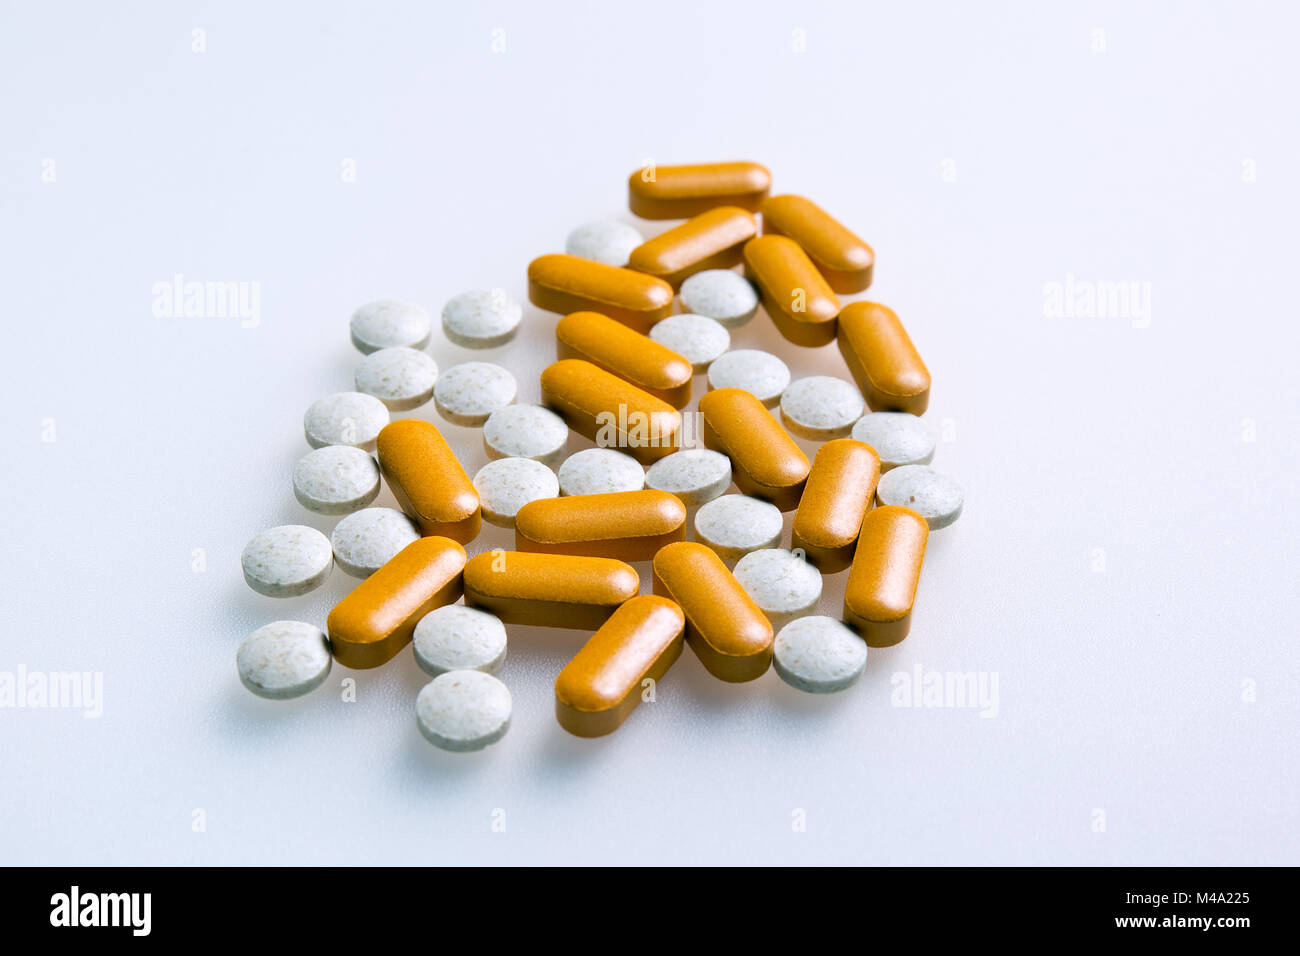 collection of pills or vitamins on a white background Stock Photo